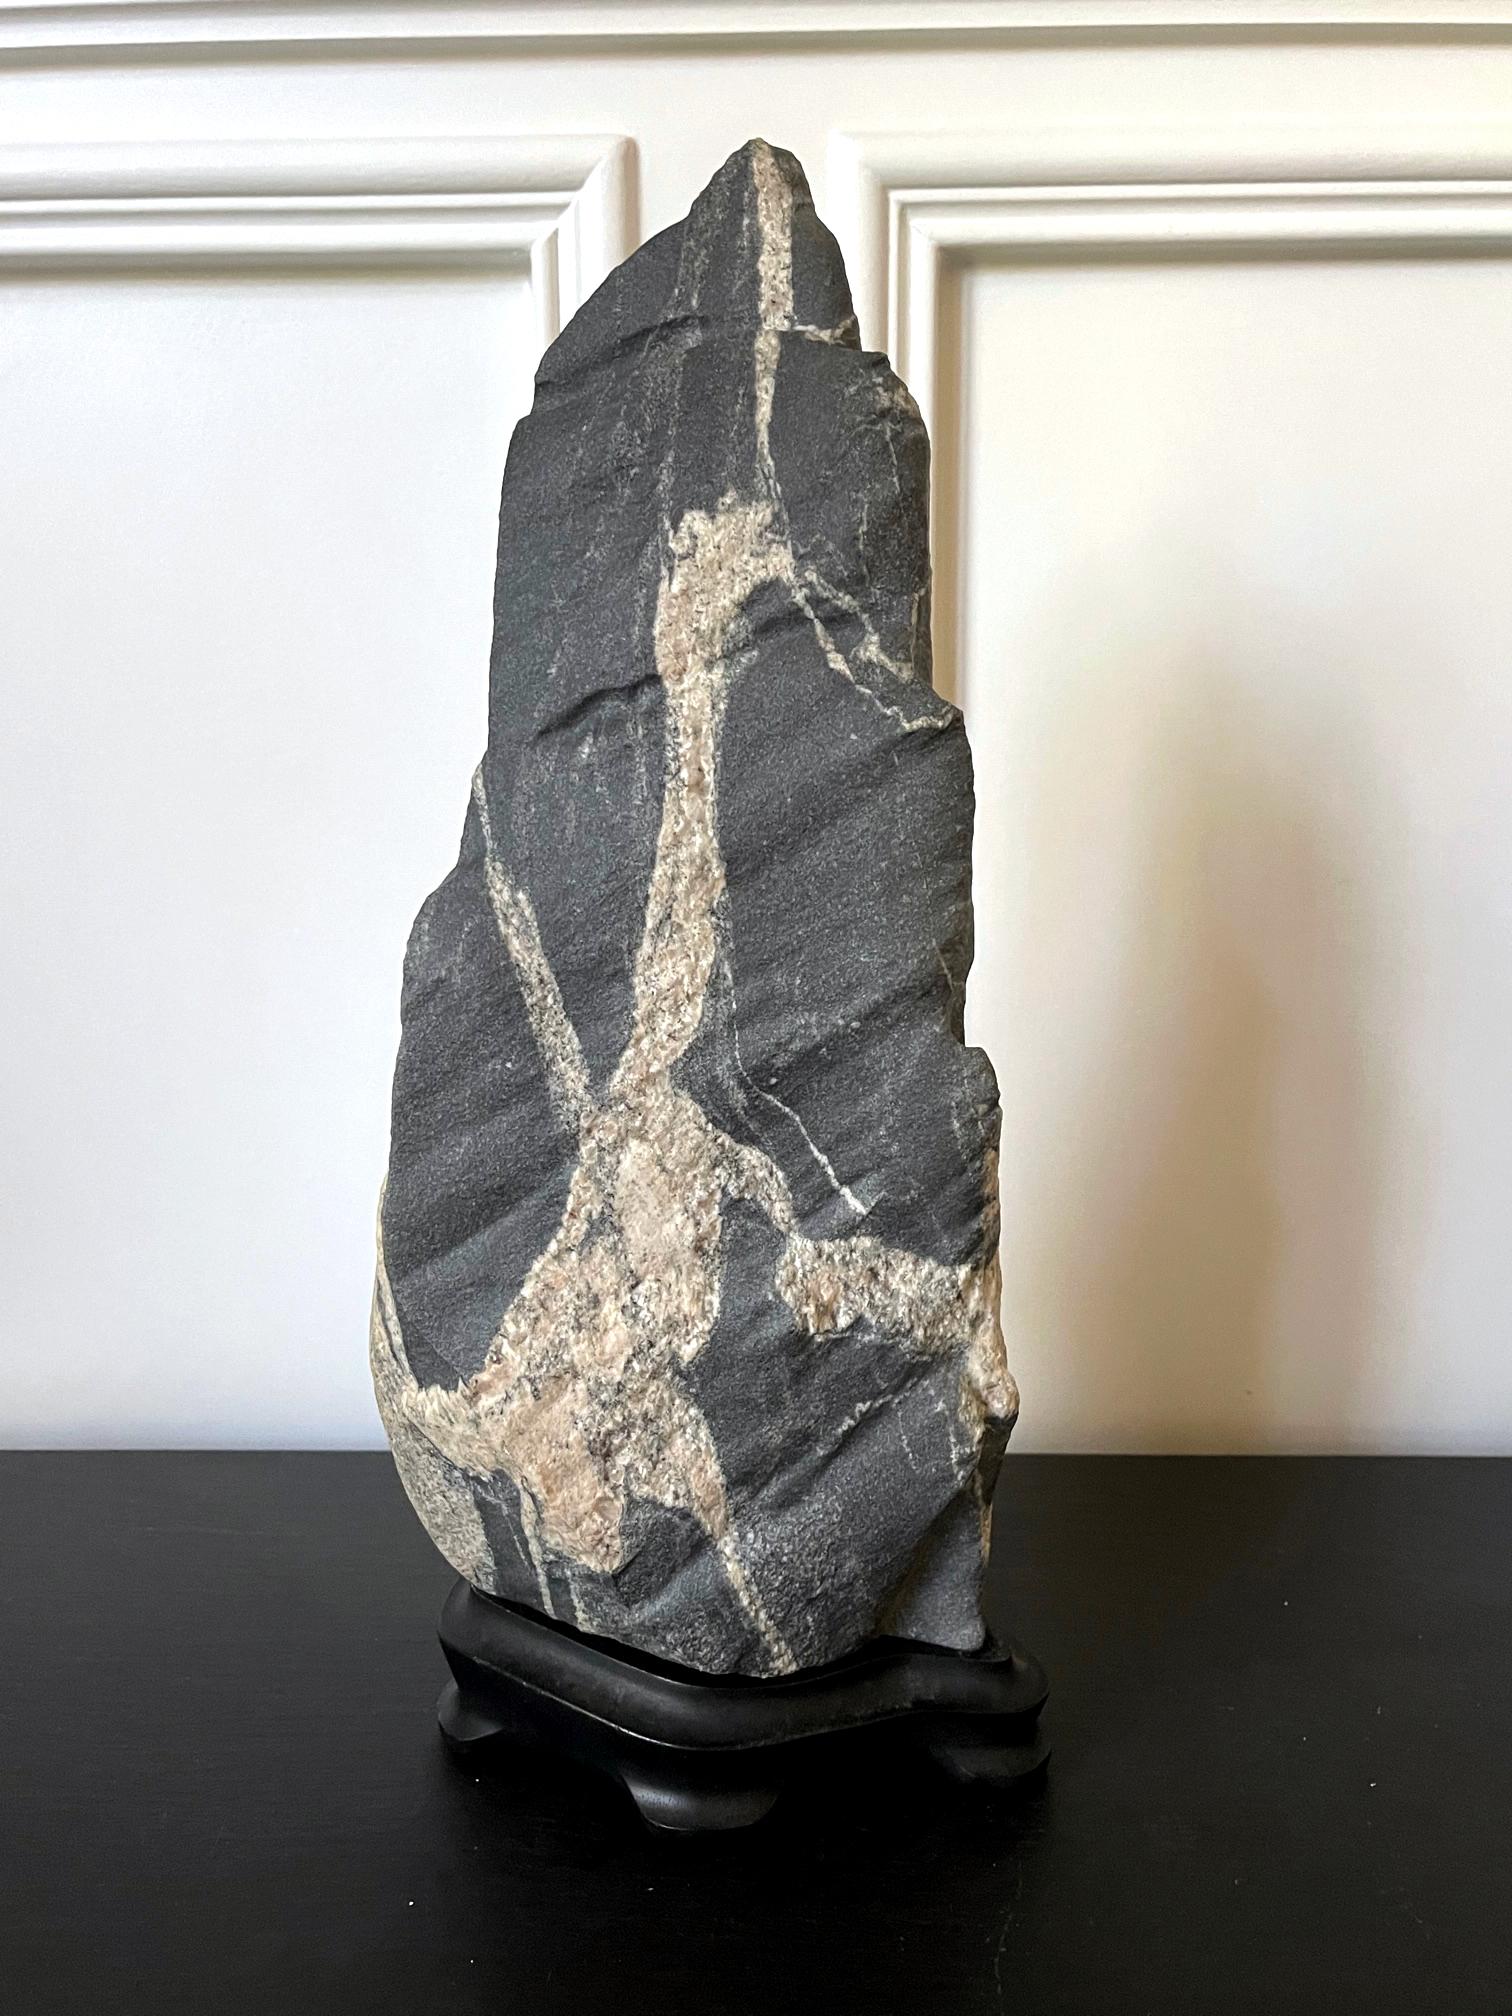 On offer is a large and expressive scholar rock on a fitted wood stand collected by an American collector in Palm Desert, CA circa 1980s. The deep grey boulder is likely granite and takes a wonderful natural form of a mountain peak. The dark matrix